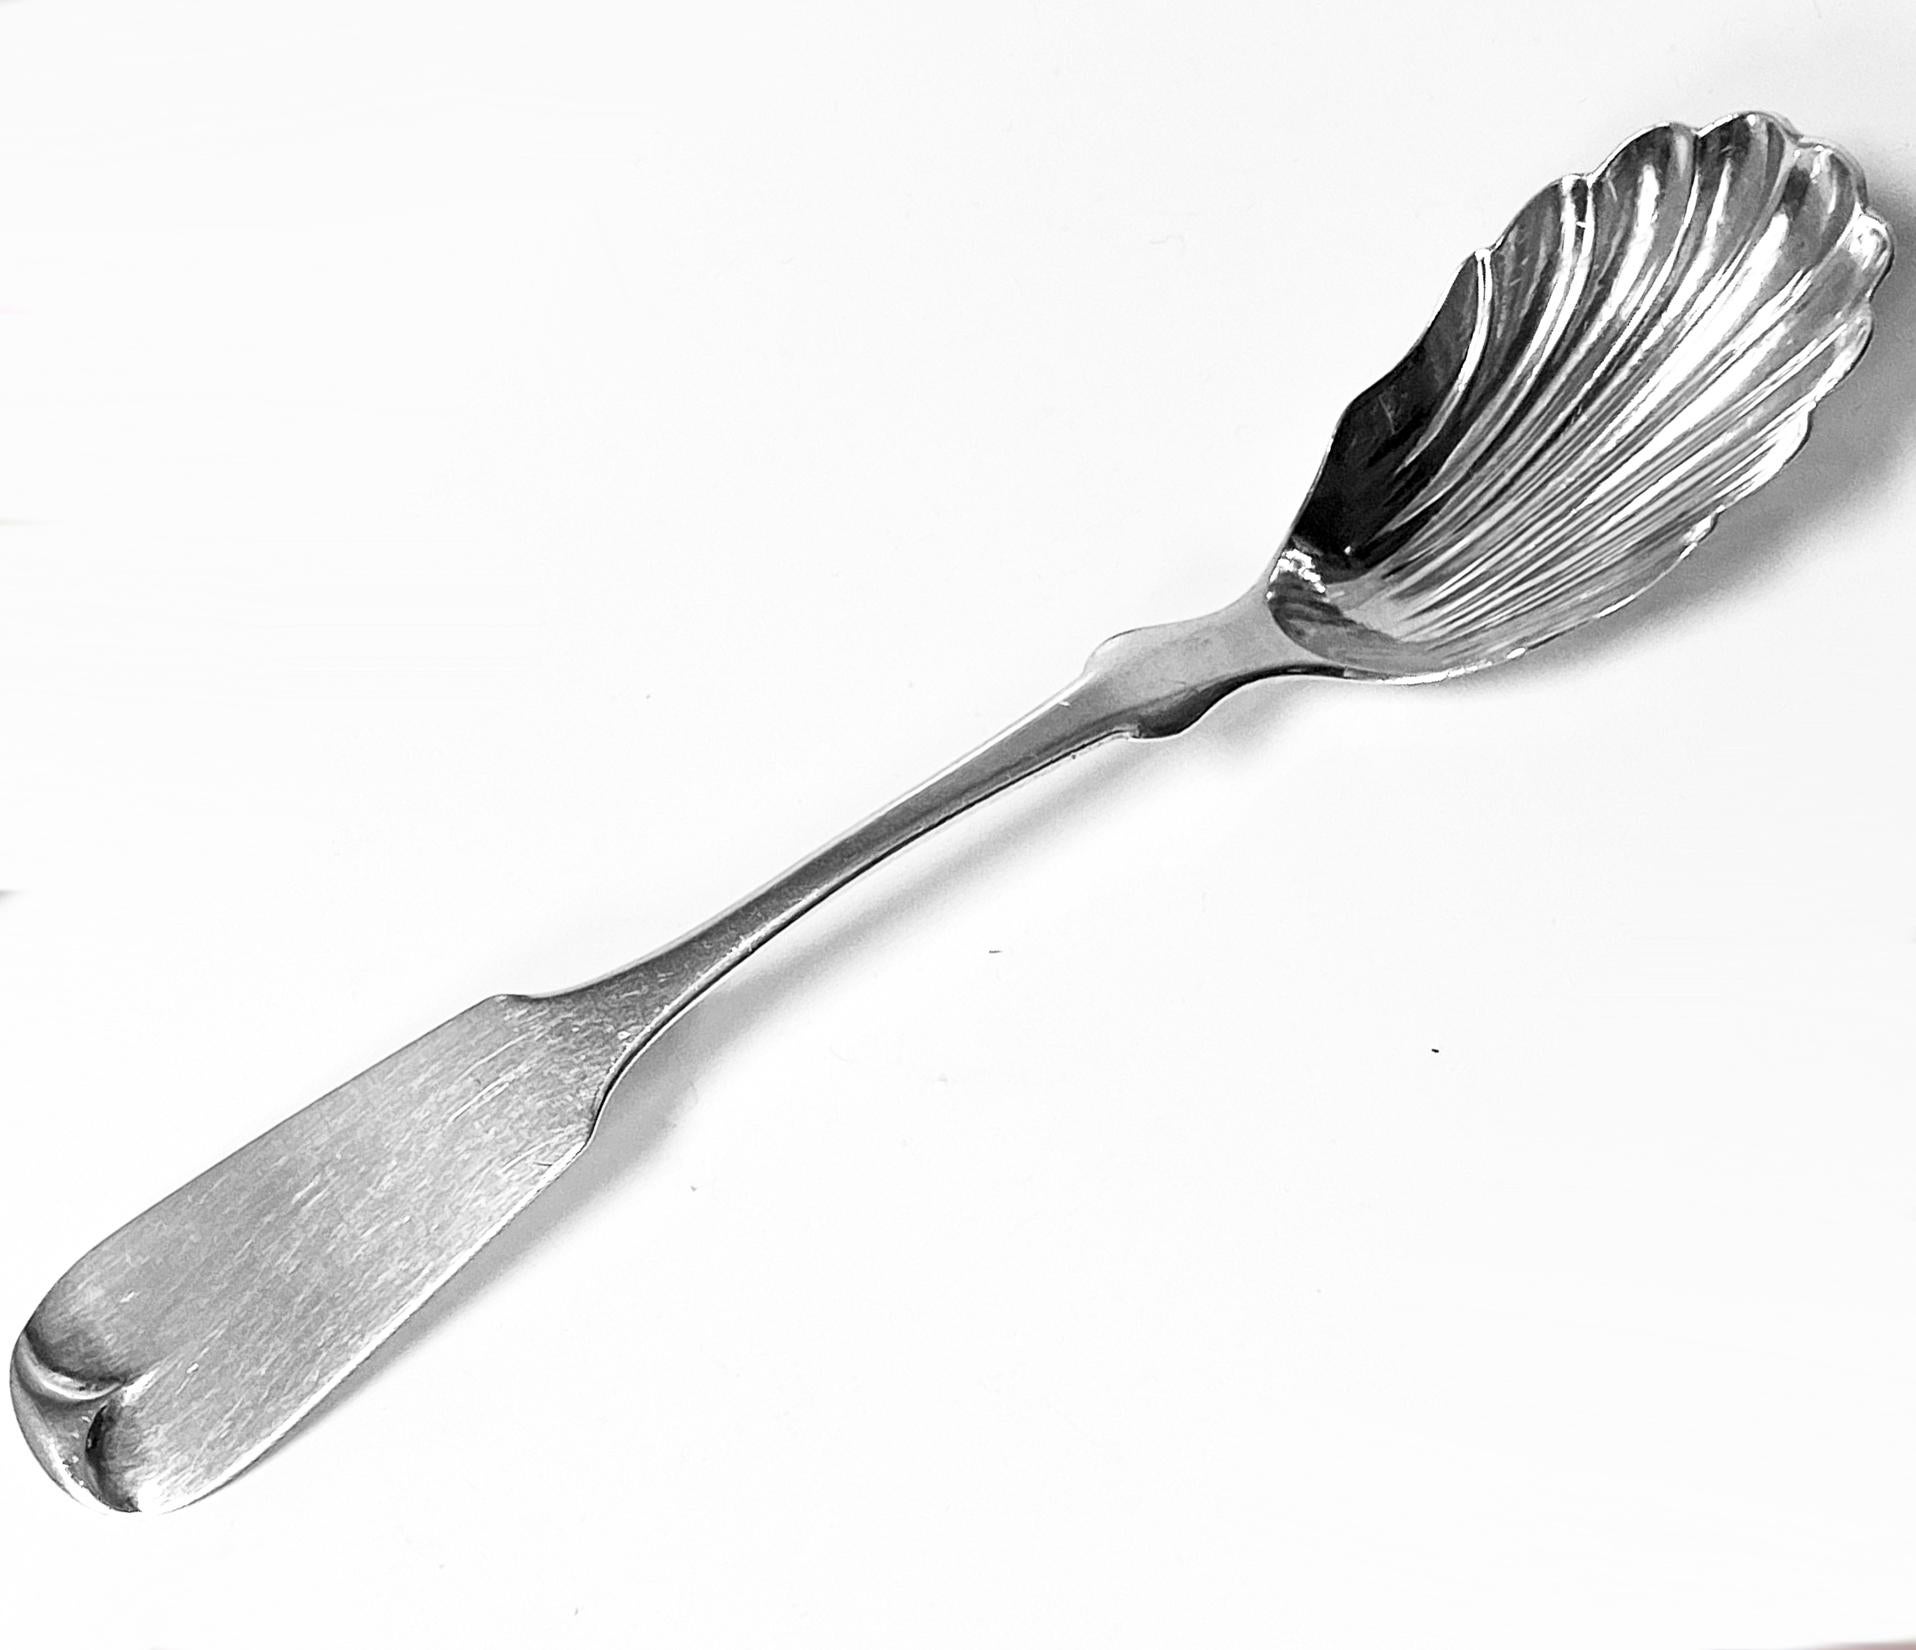 Antique American Silver Jam or Sugar Ladle Spoon Newburg New York C.1850 John Westervelt, retailed by D.G. Leonard. Elongated fiddle handle with scalloped shell bowl. Good patina, good marks, no issues. Length: 6.75 inches. Weight: 23.50 grams